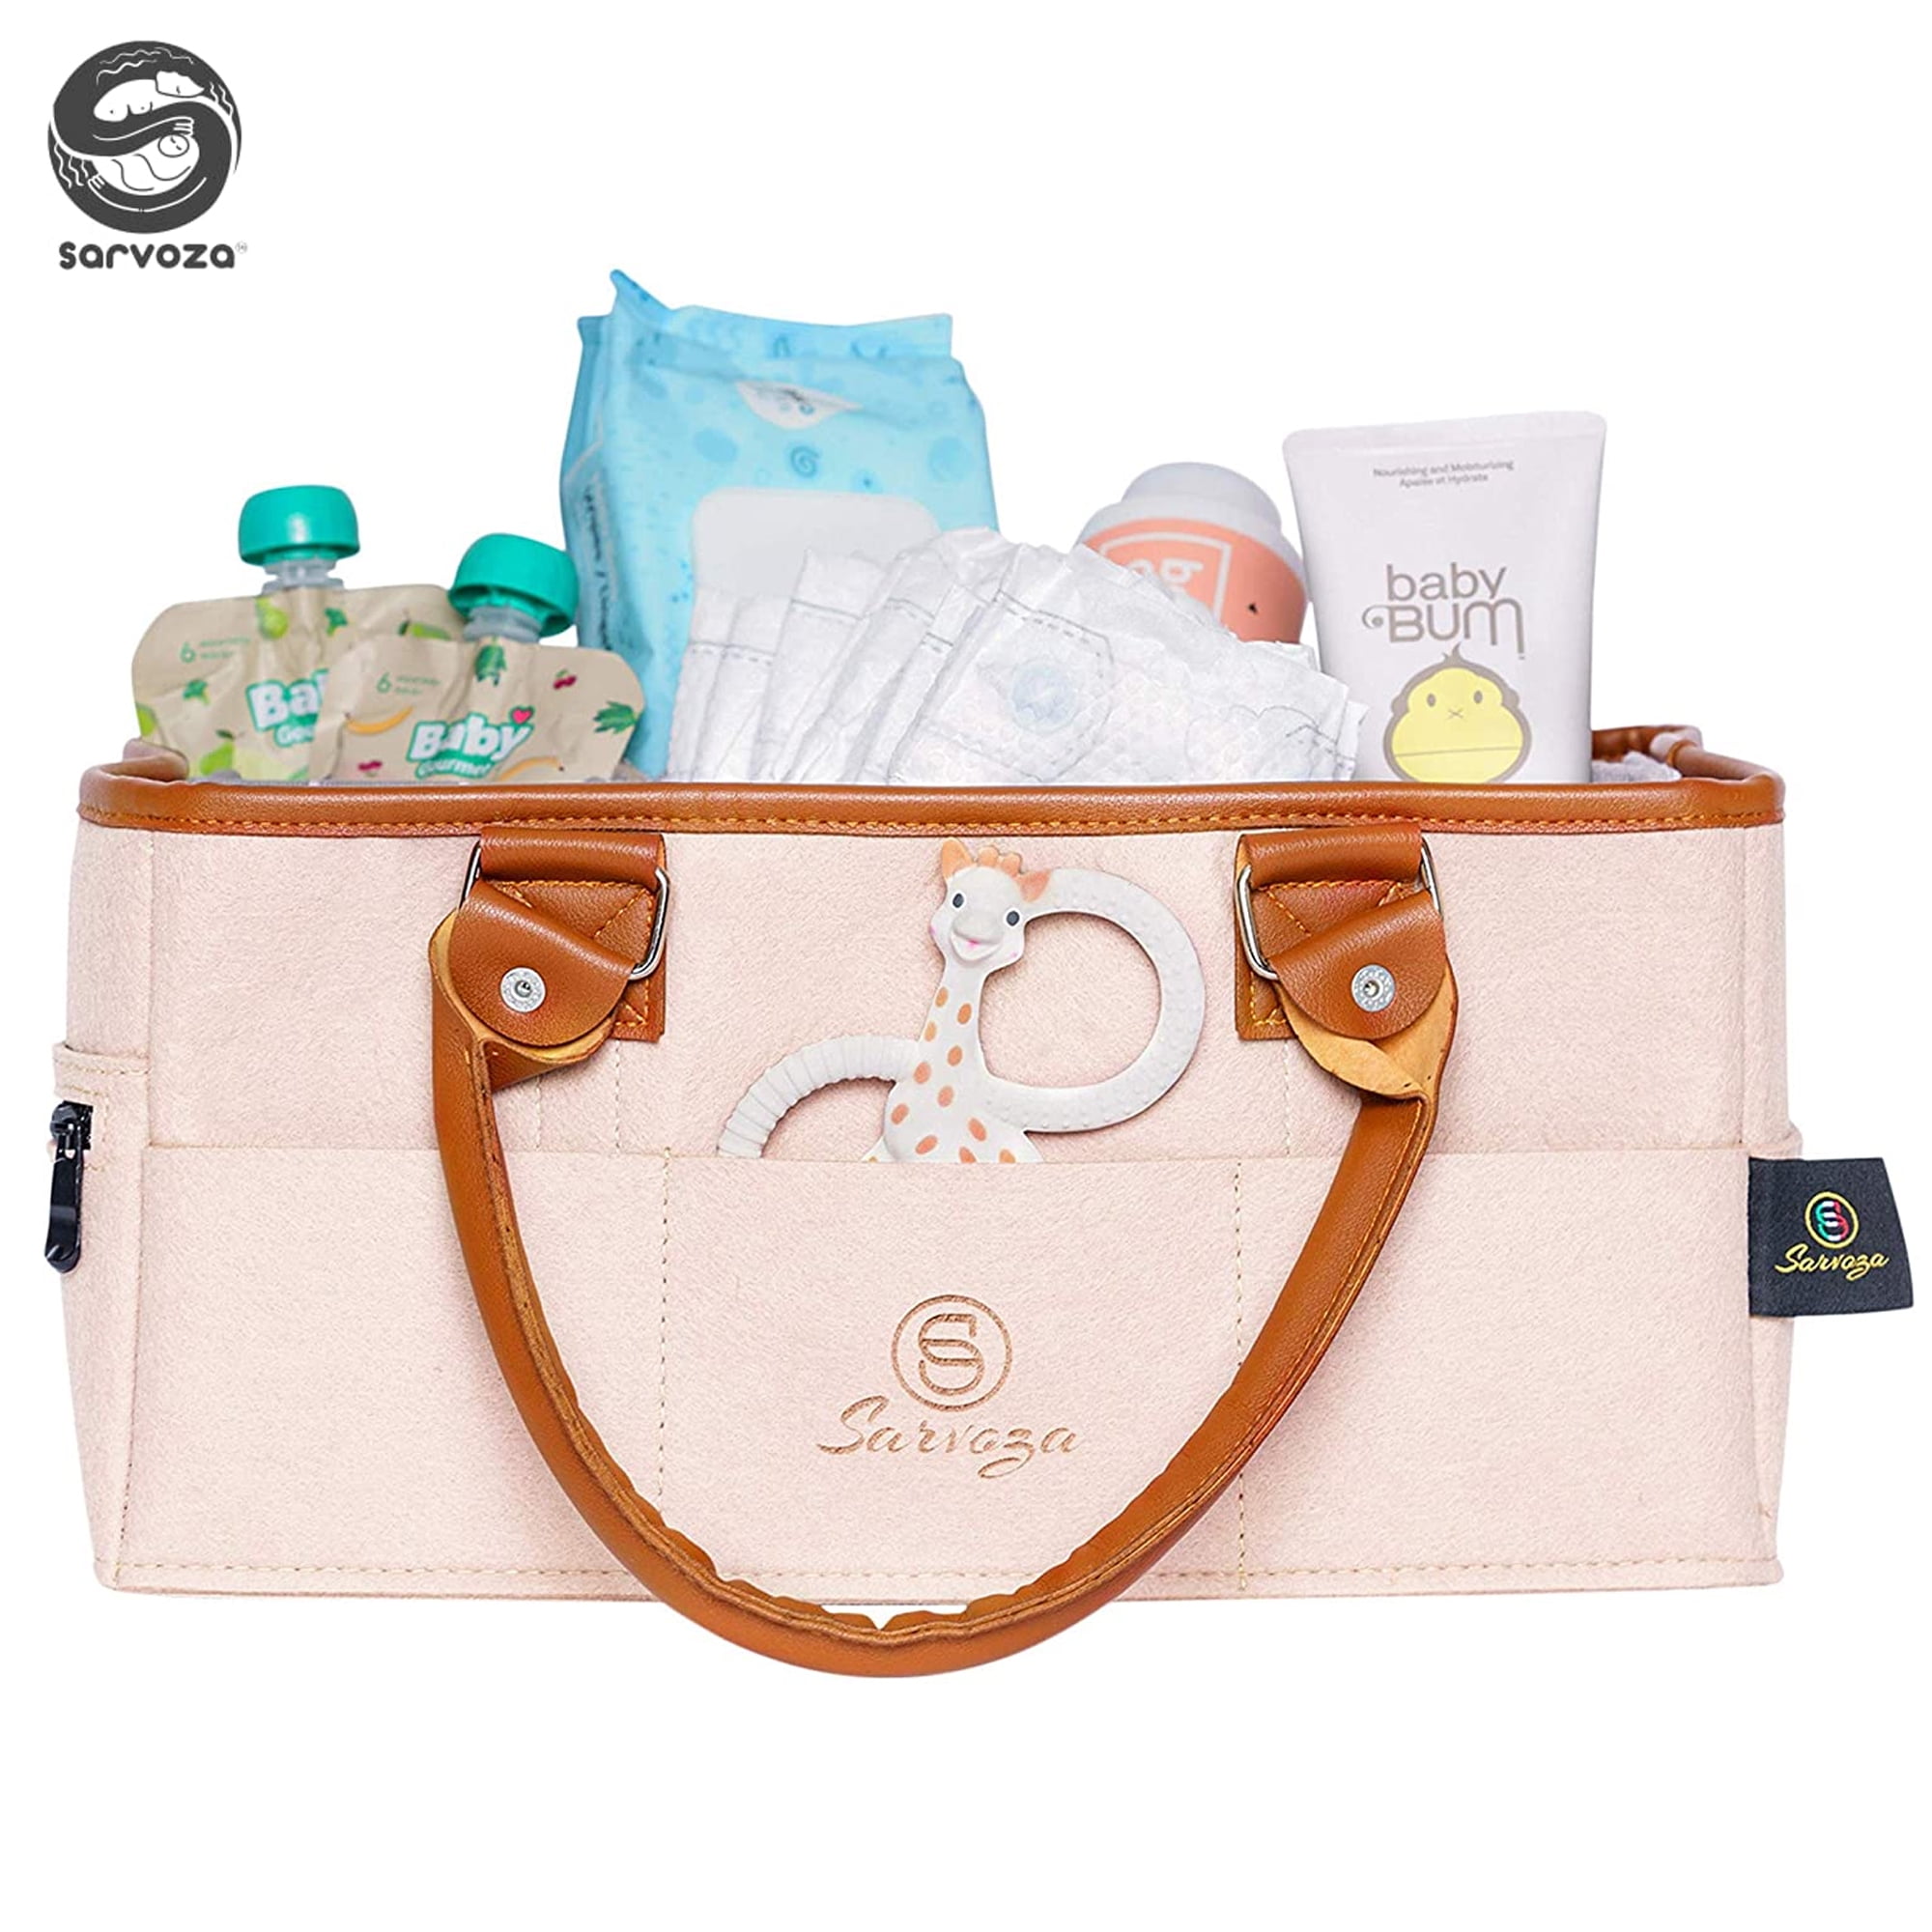 Baby Diaper Caddy Organizer Portable Holder Bag for Changing Table and –  Giant Slayer Children's Boutique